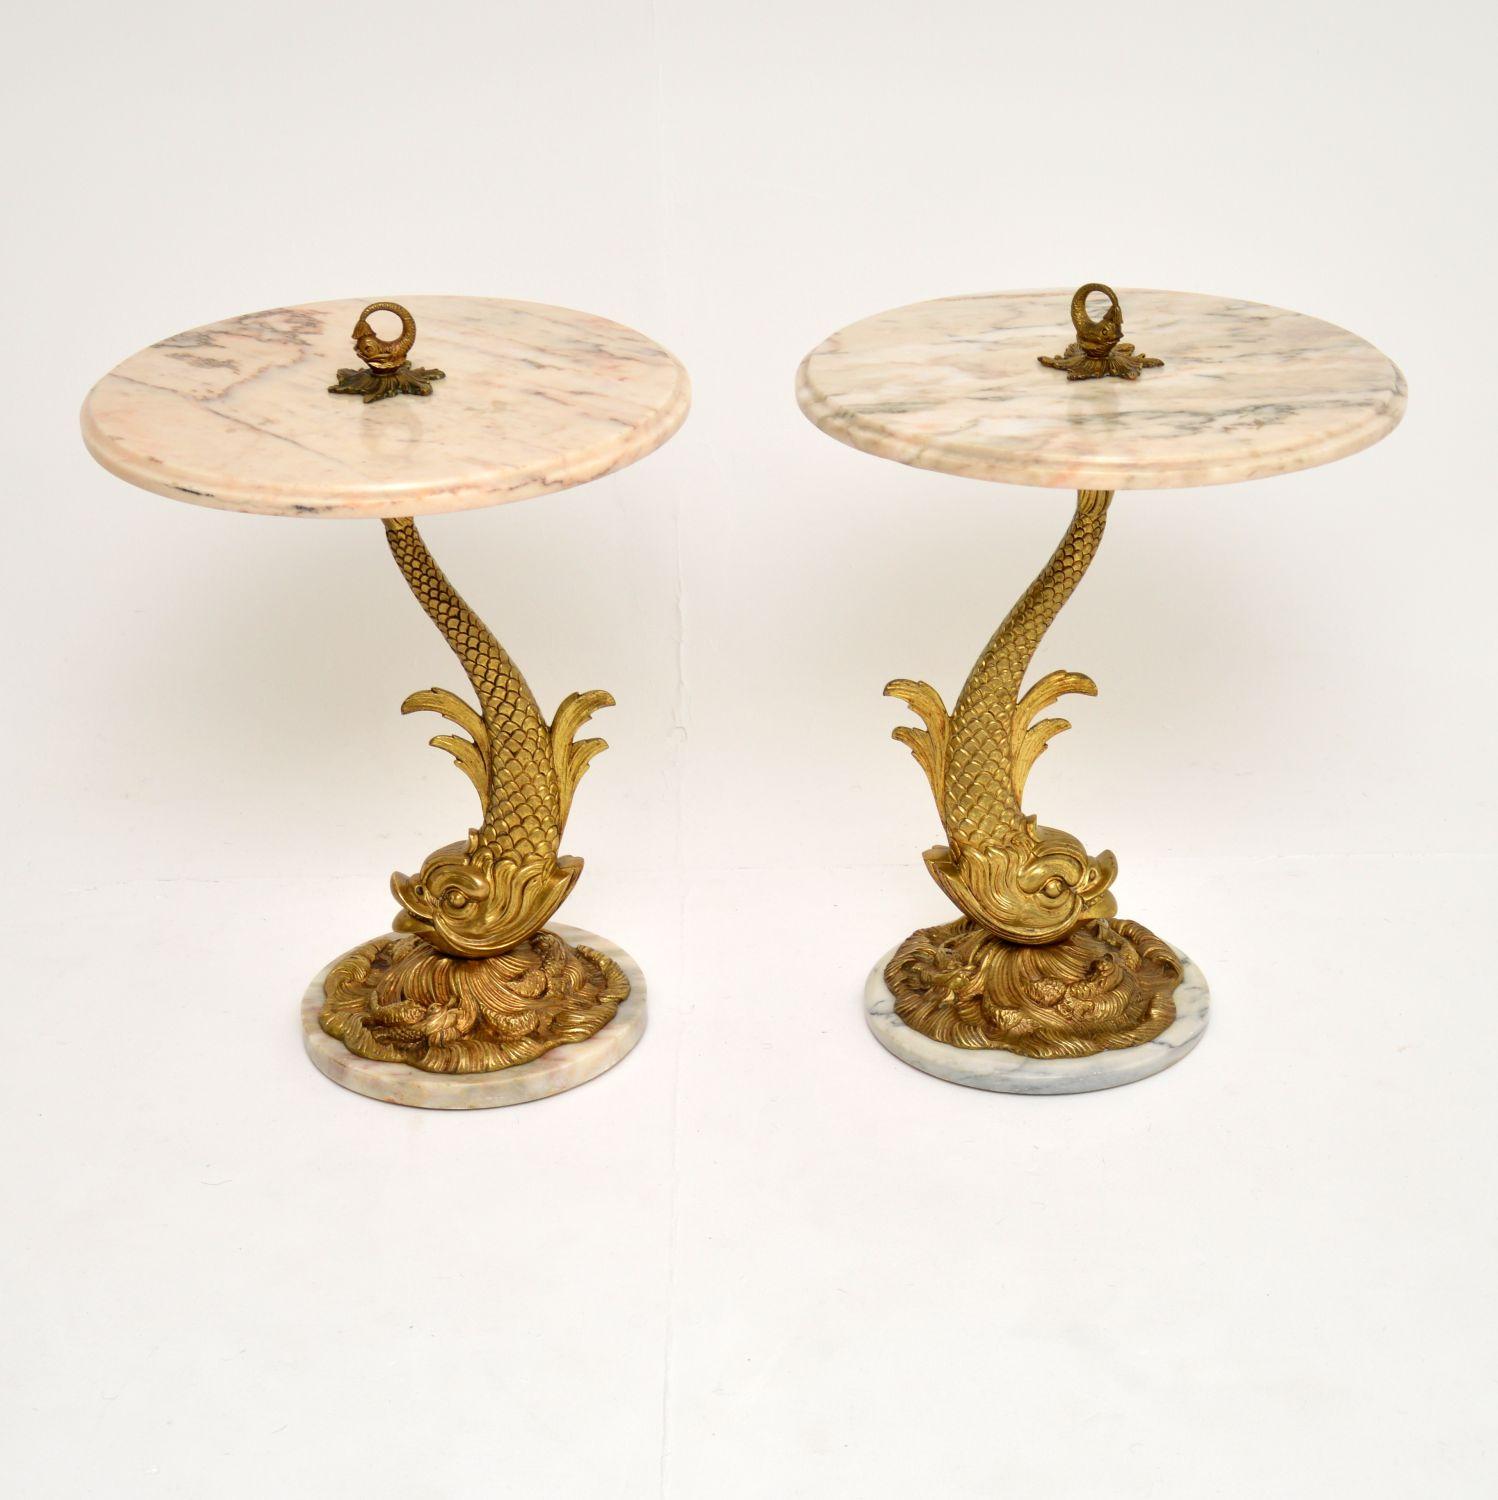 A stunning and unusual pair of antique side tables, dating from circa 1930s. These were most likely made in France, they are of amazing quality and have a fantastic detailed design.

The supports are solid brass and are made in the images of sea